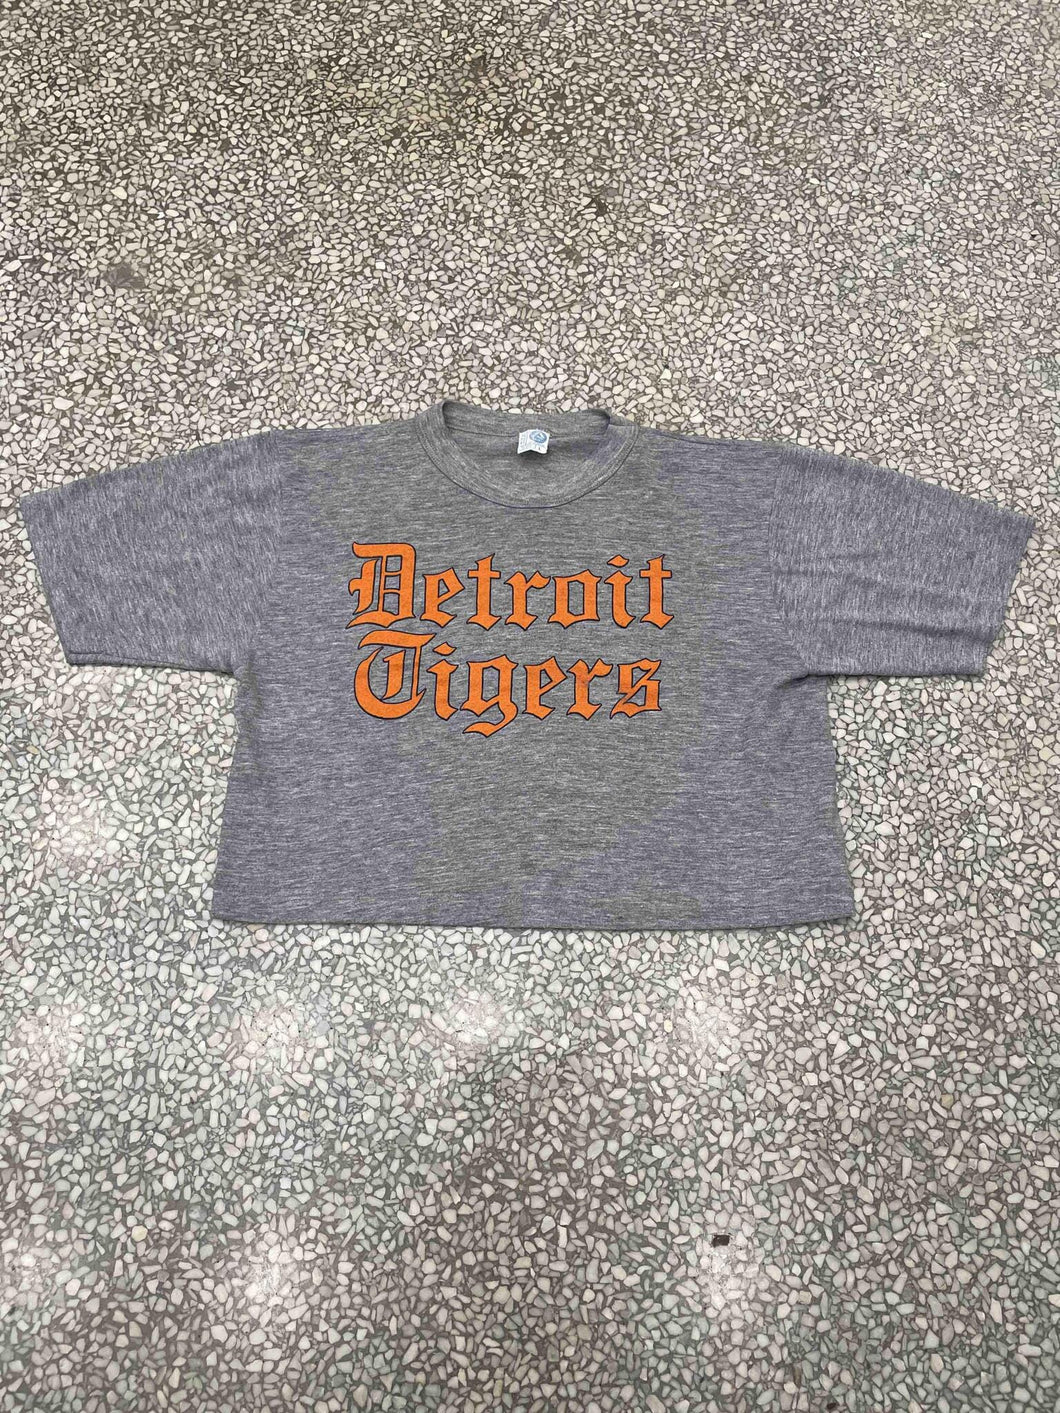 Detroit Tigers Vintage 80s Old English Cropped Tee Grey ABC Vintage 